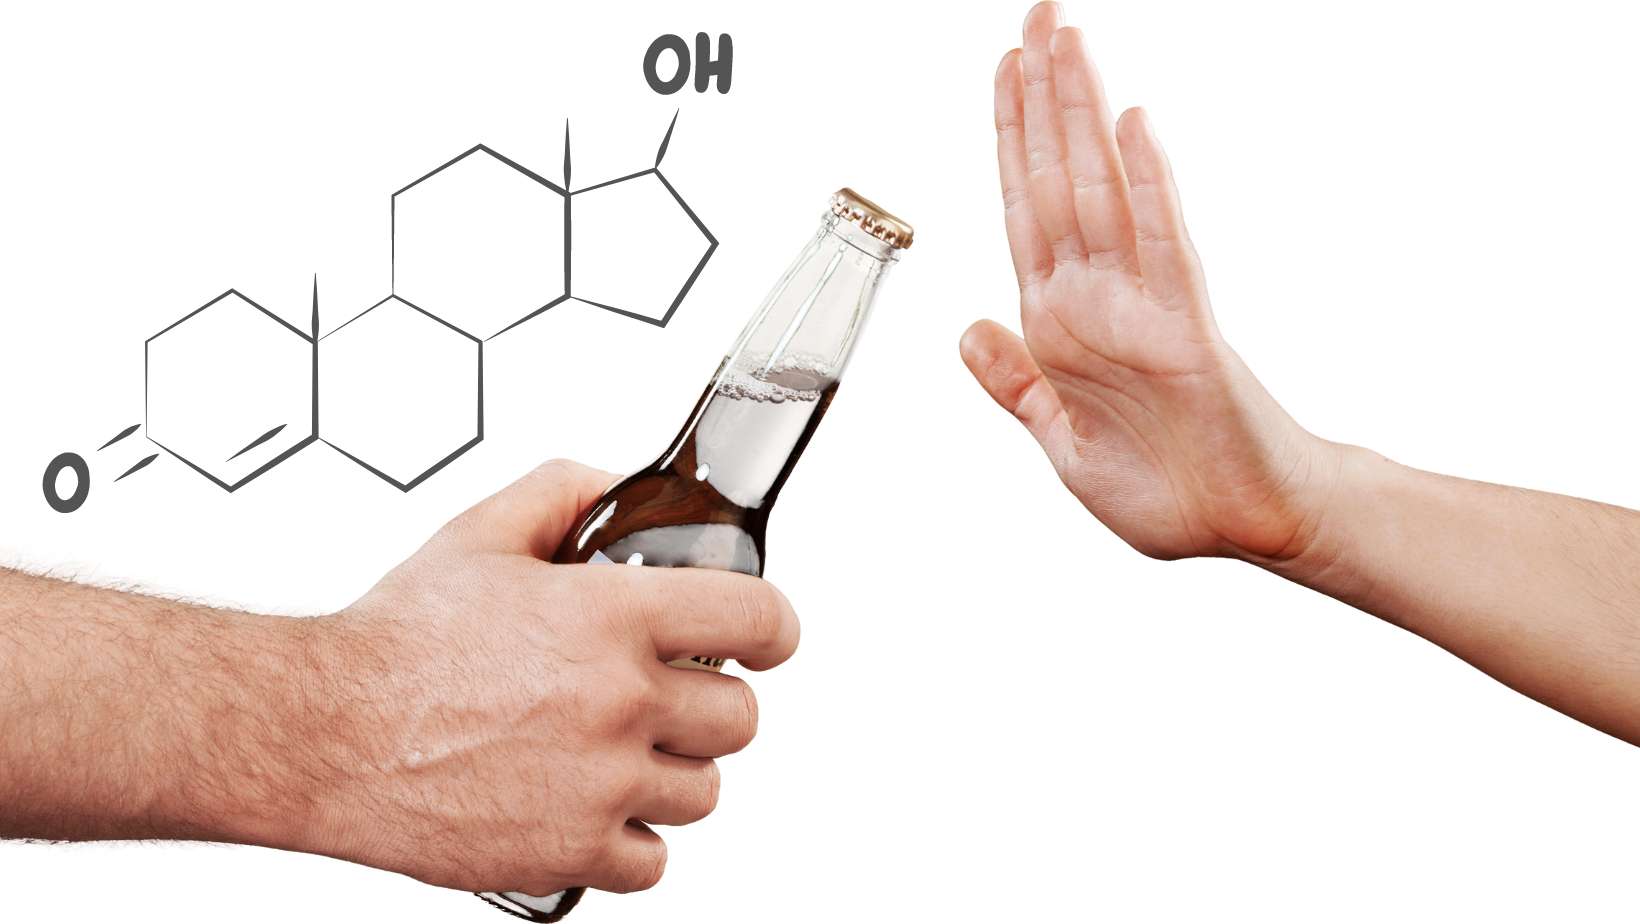 hand offering an alcohol and the other hand rejecting it